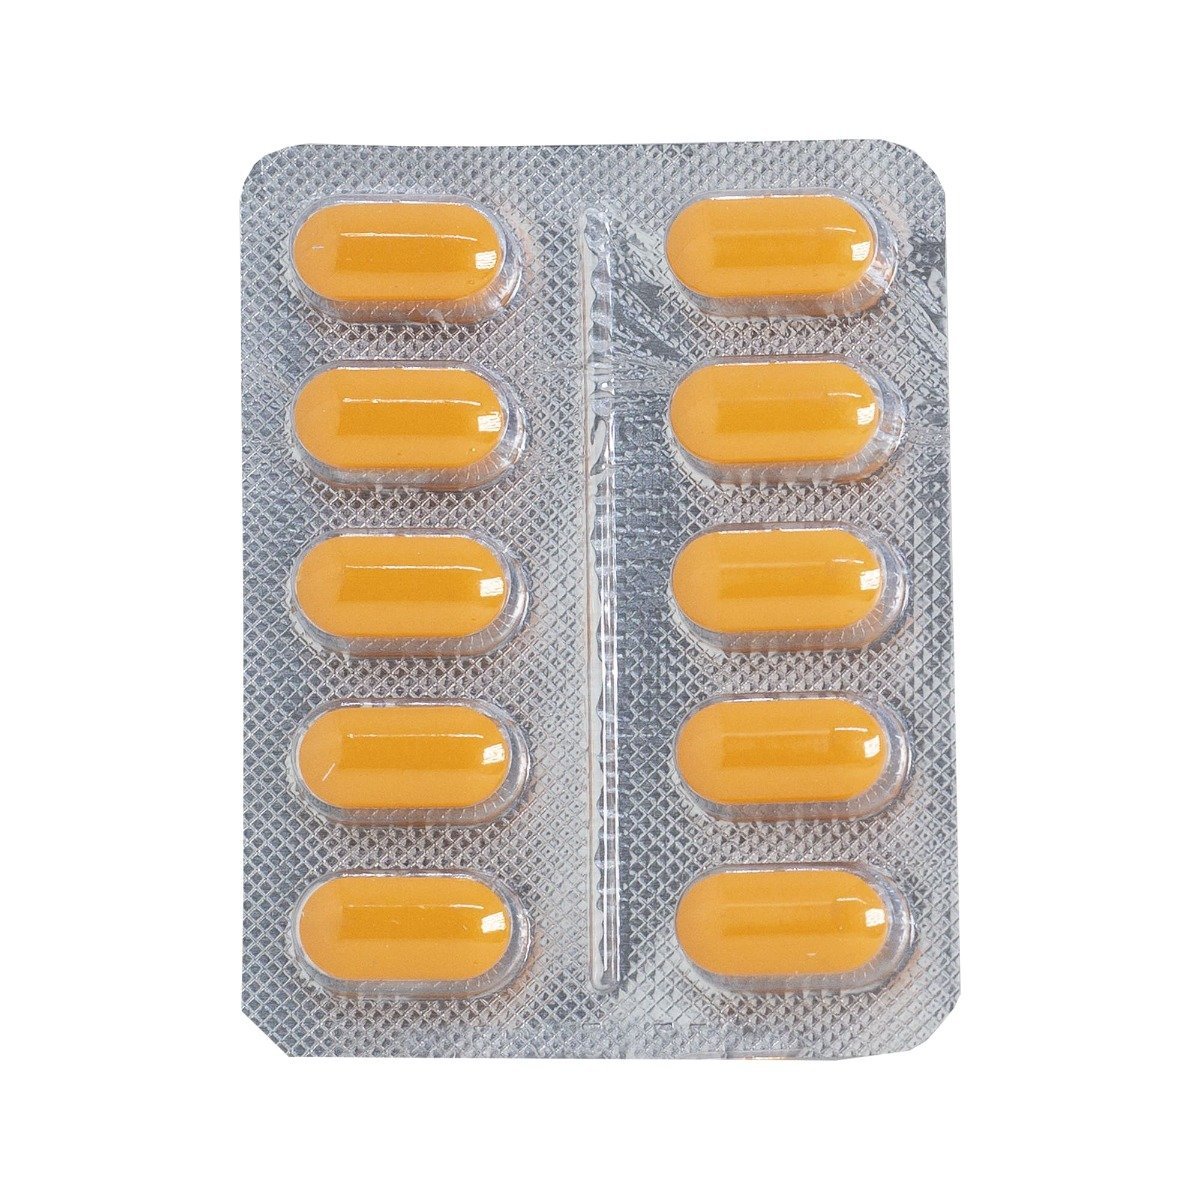 One Two Three - 20 Tablets - Bloom Pharmacy